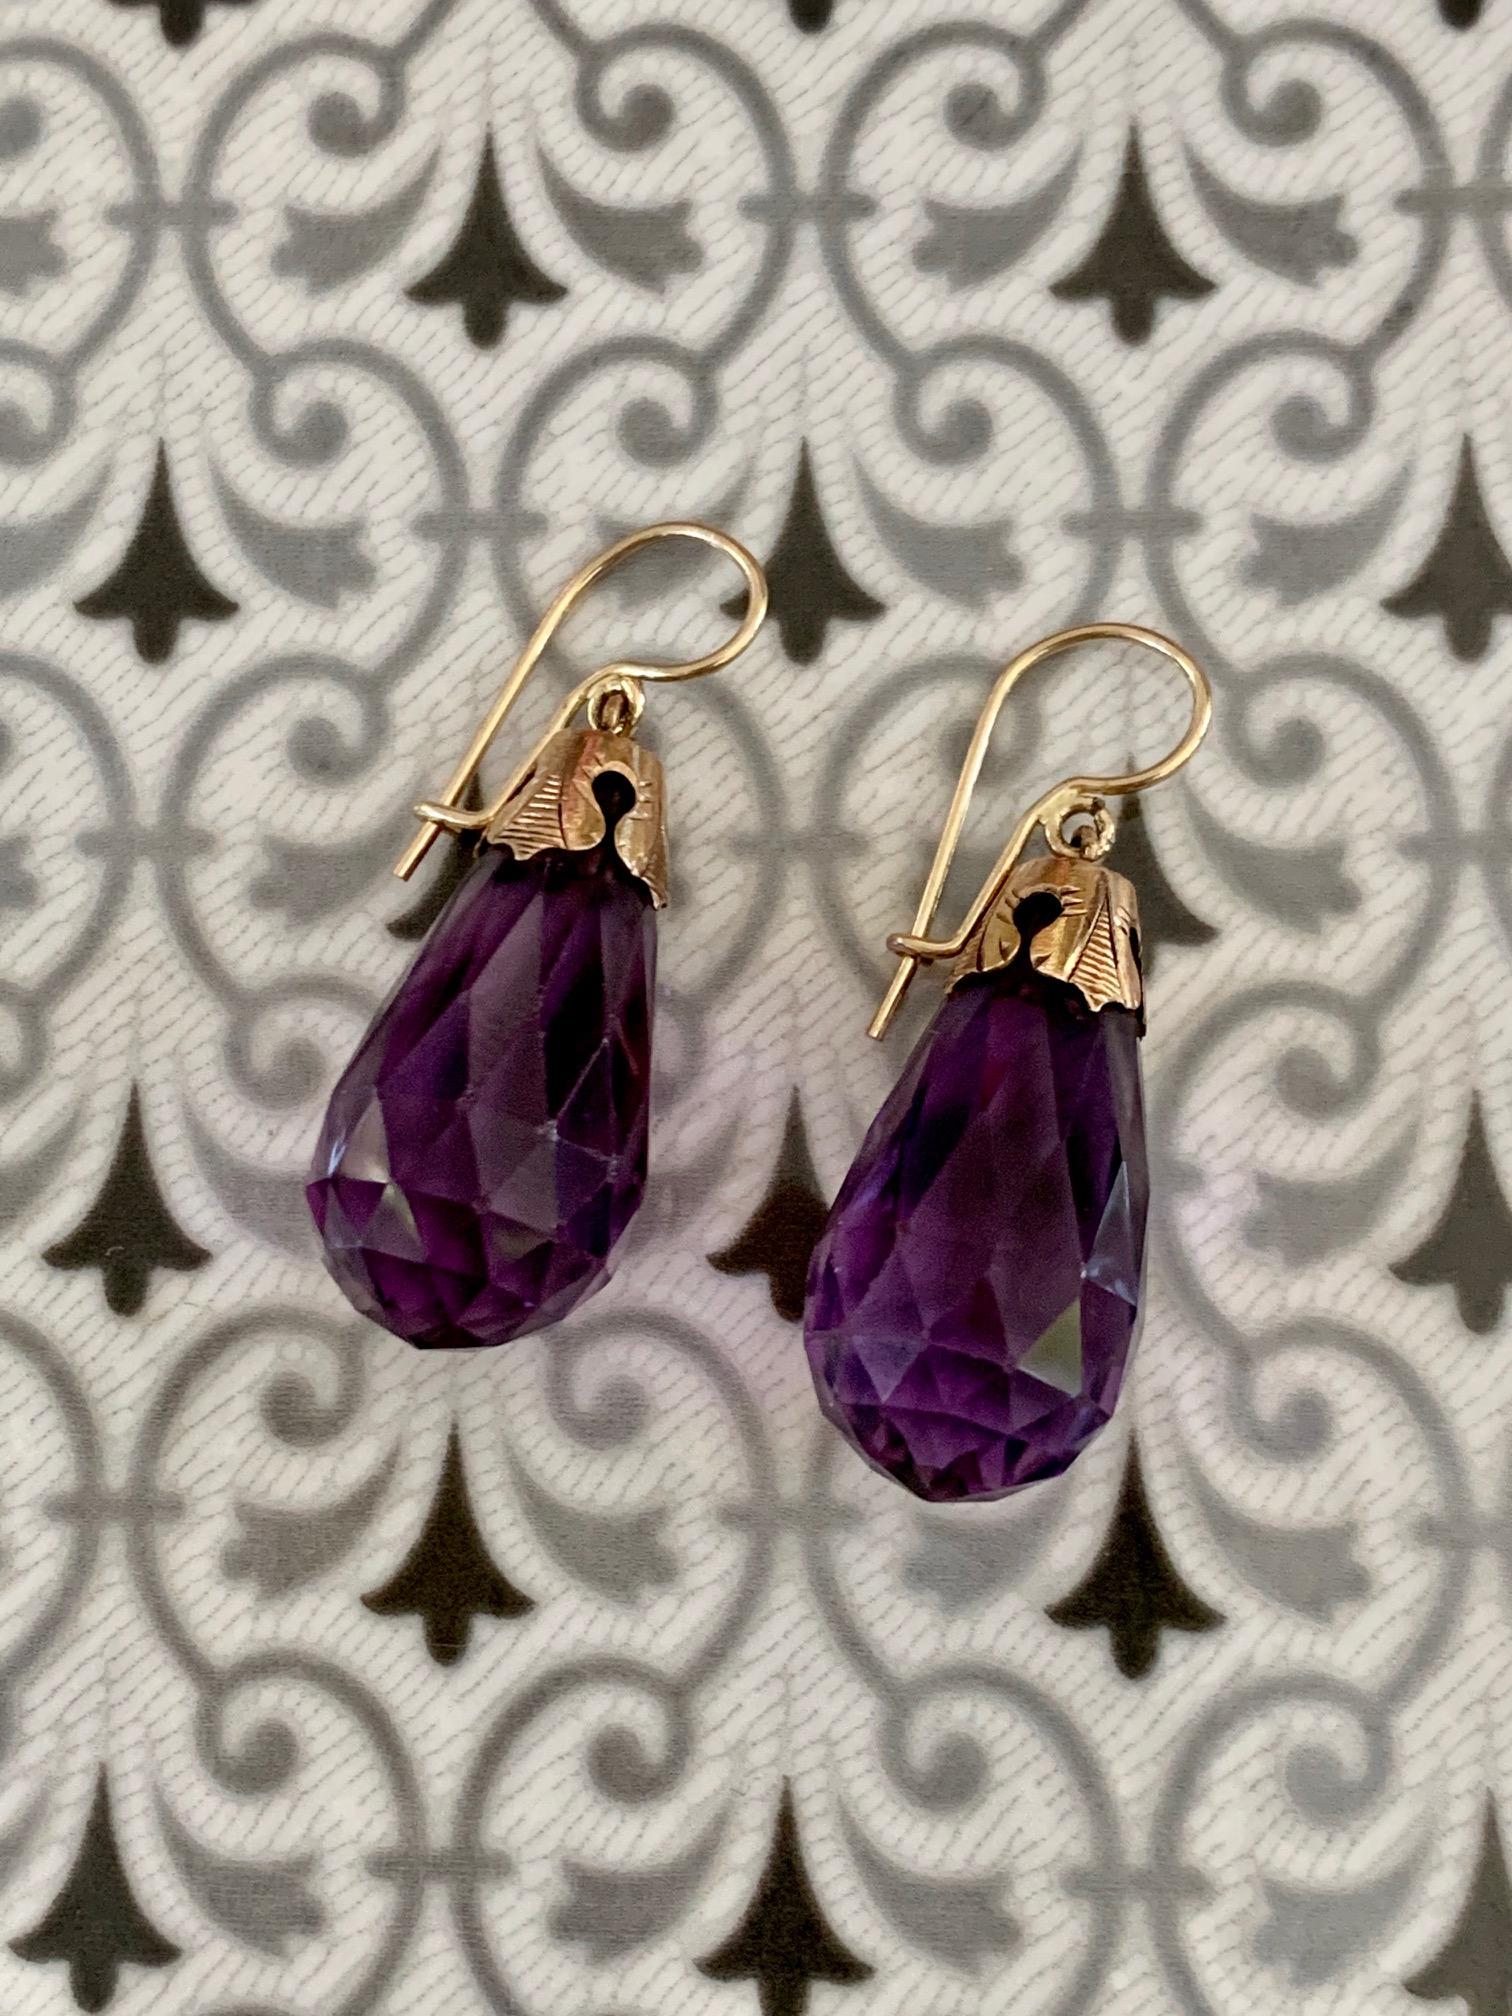 These tear drop, faceted Amethyst drop earrings are perfect for anyone, but especially the February birthday gal!  These are simple, but oh so beautiful.   The multiple facets reflect light from every angle.  
The Amethyst stones are held in place